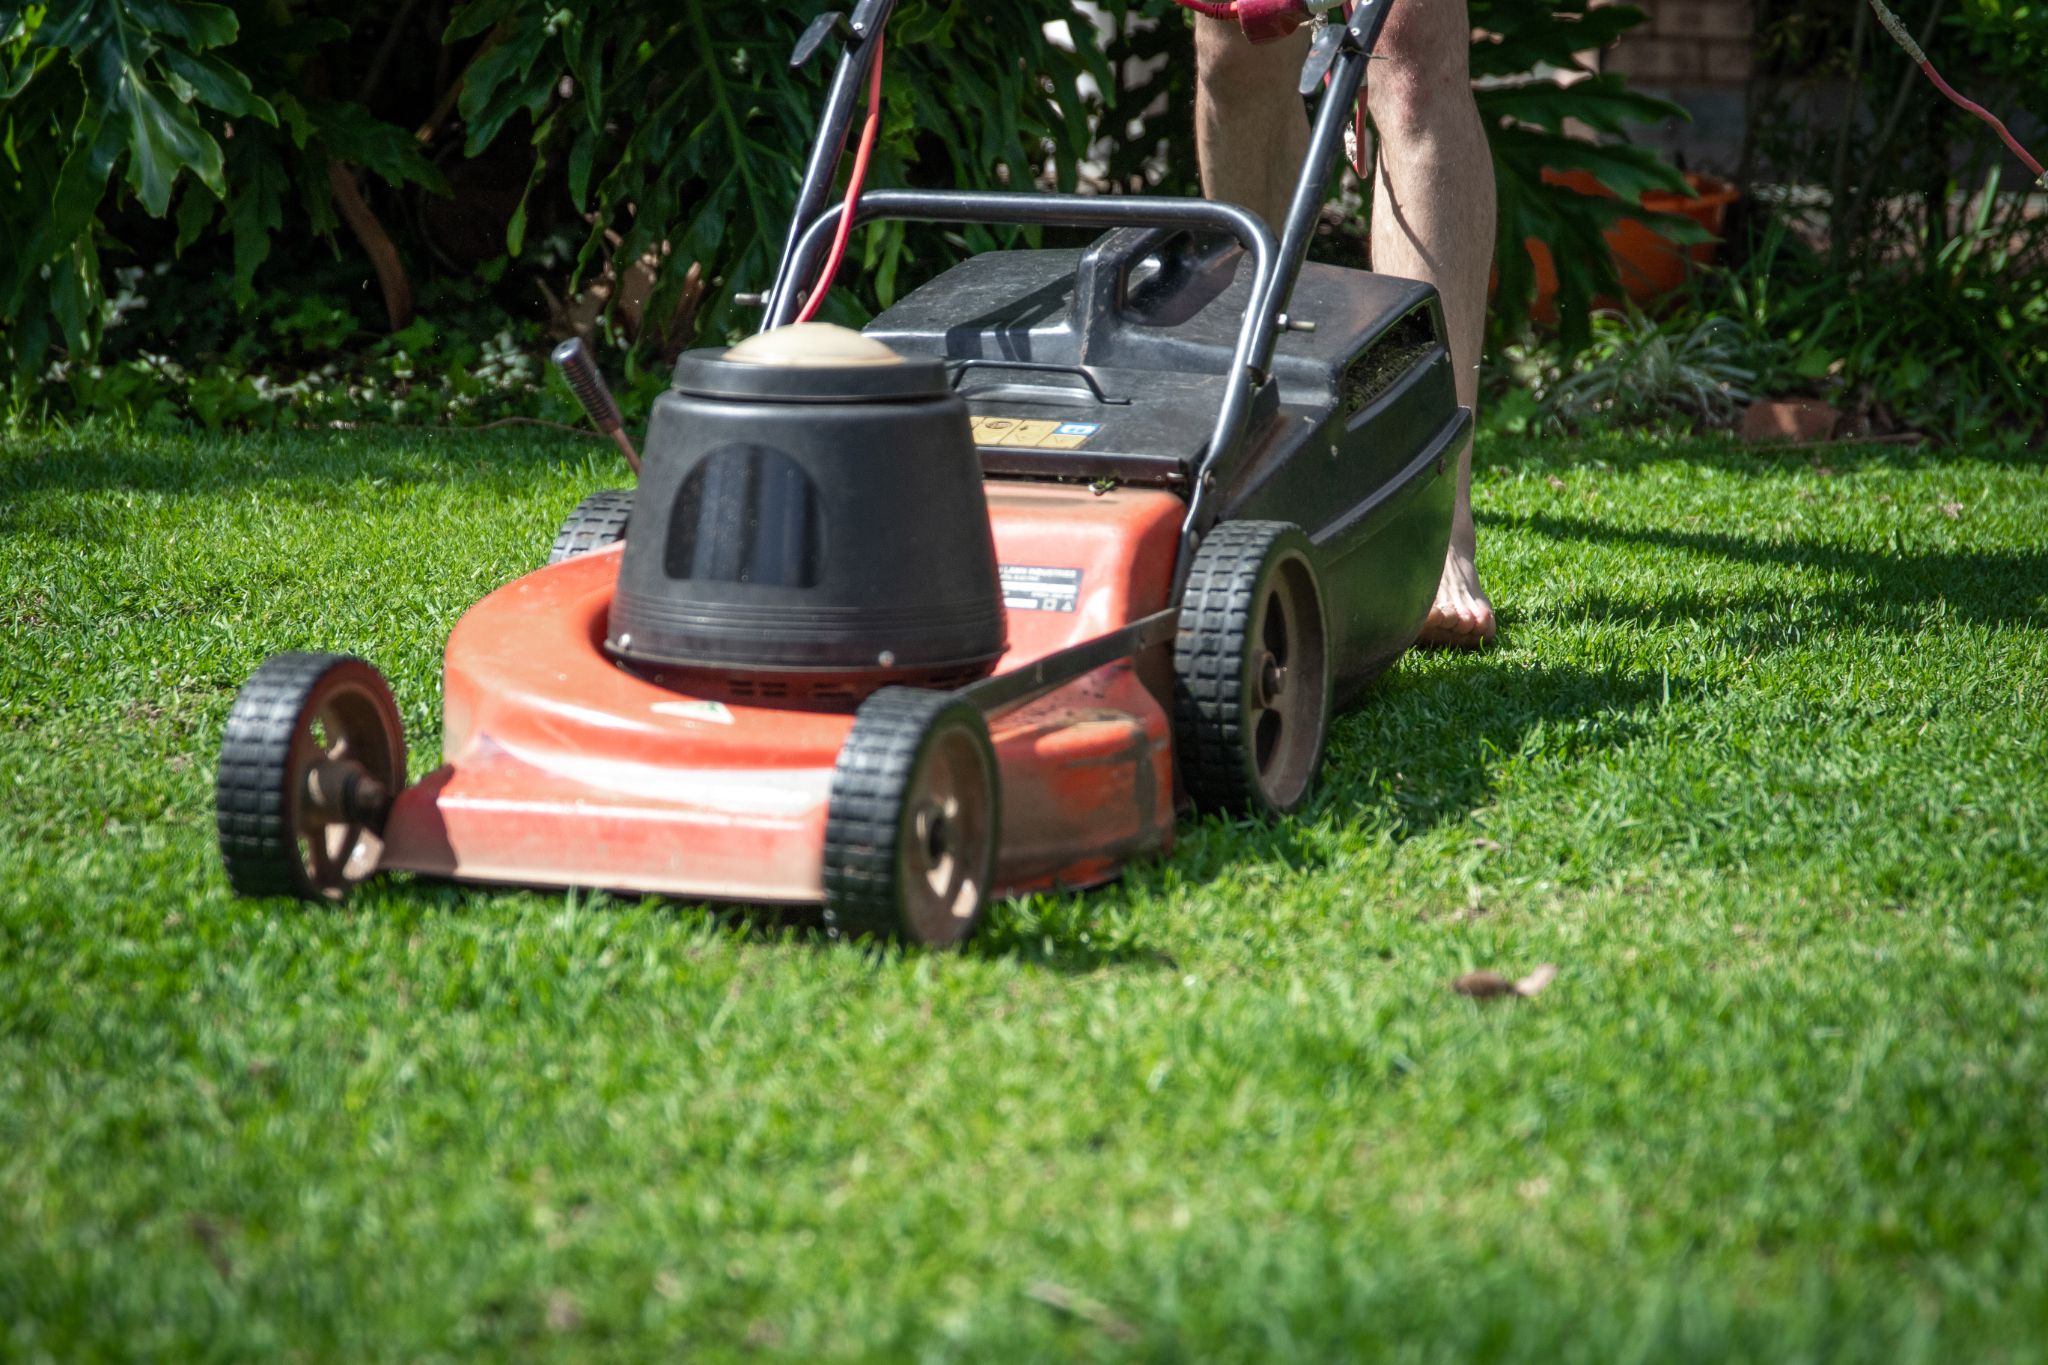 When is a Good Time to Buy a Lawn Mower?